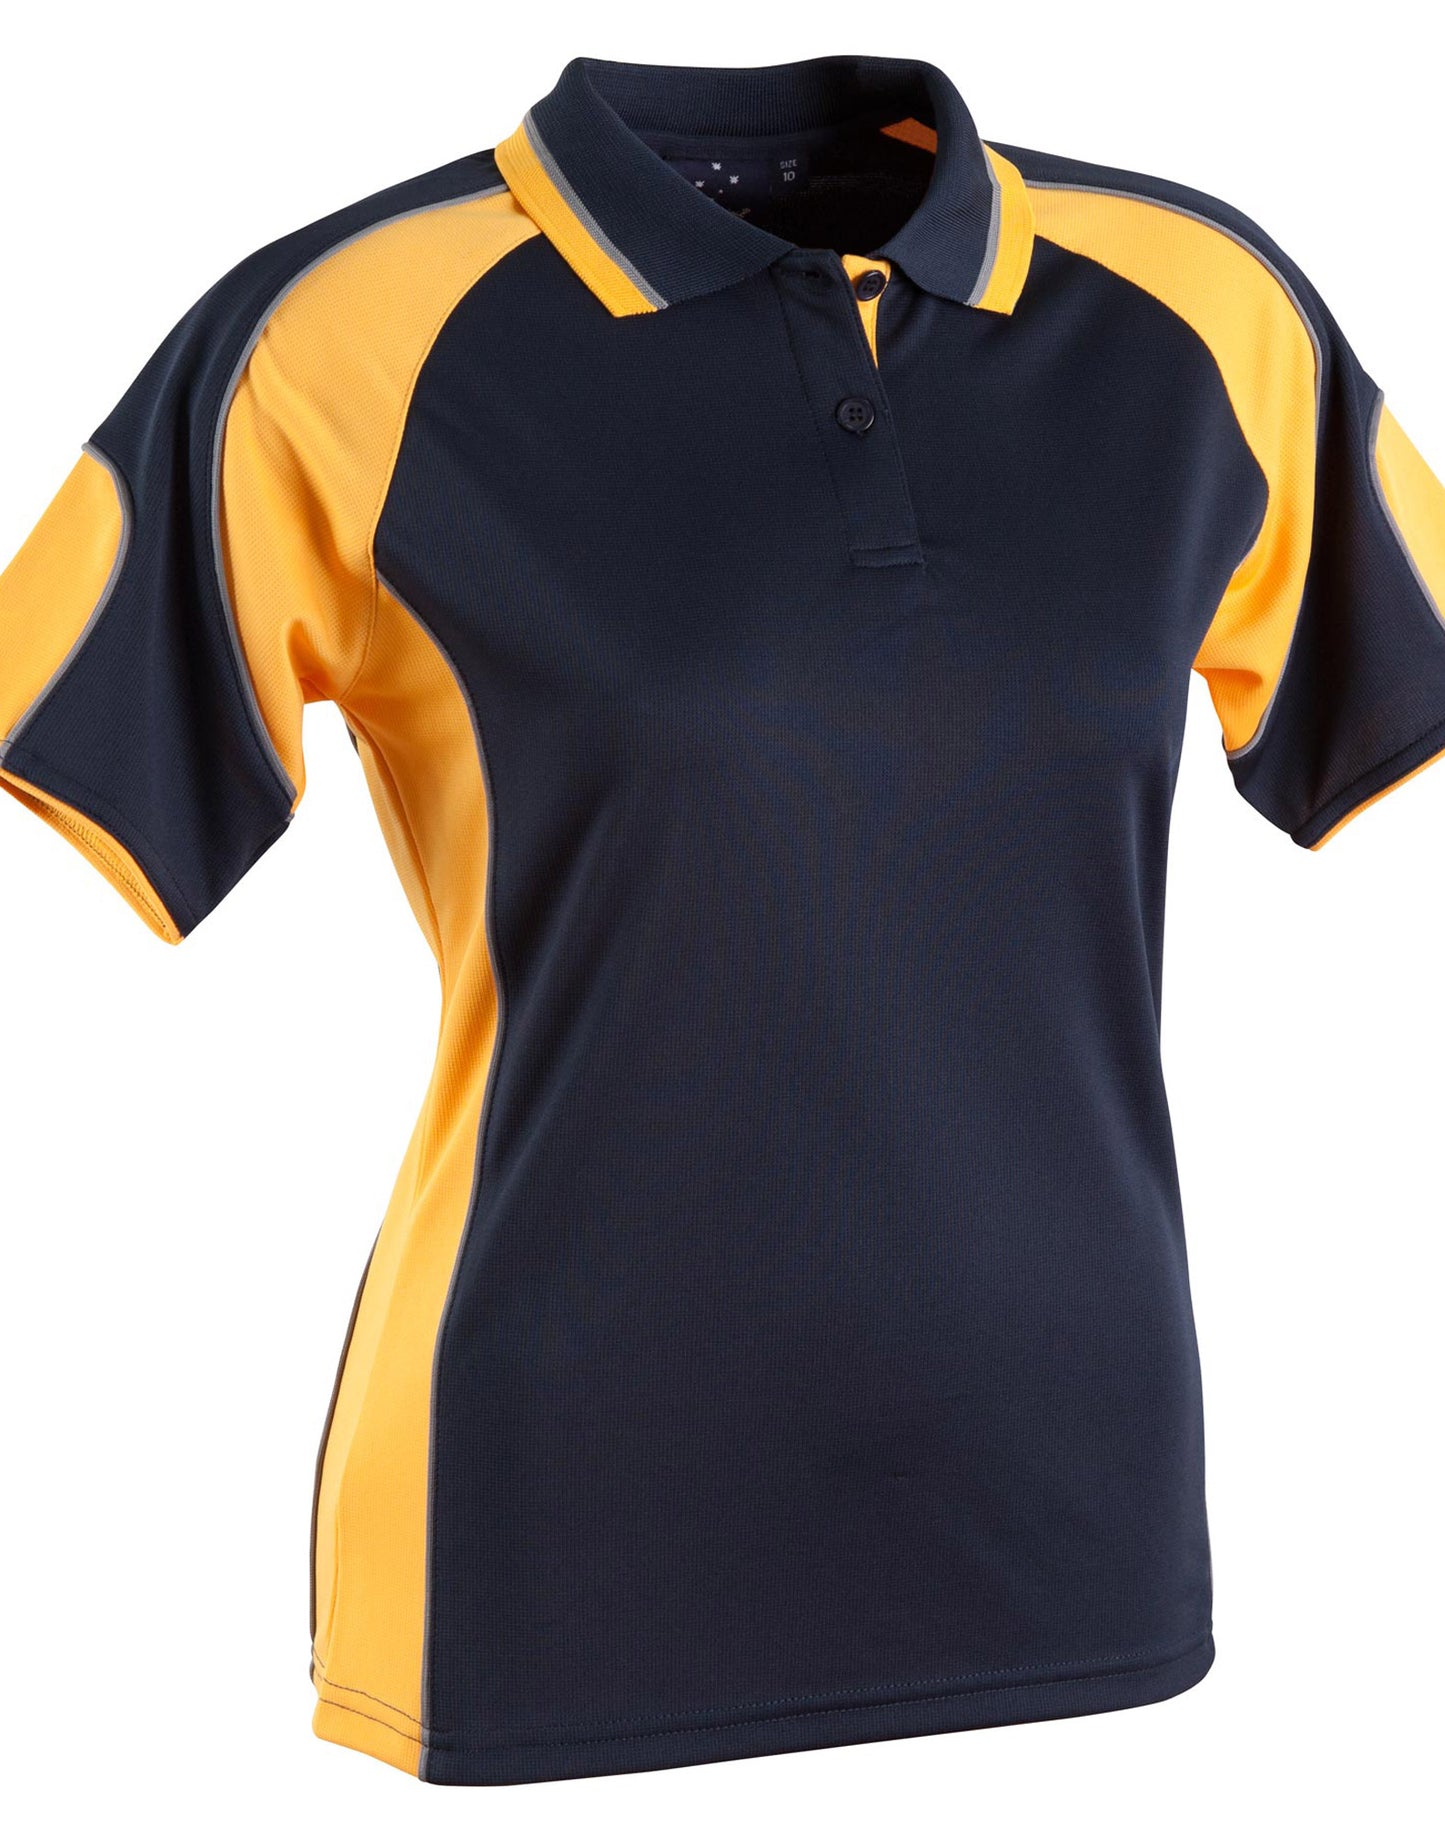 Winning Spirit -Ladies' CoolDry® Contrast Polo with Sleeve Panels-PS62-1st